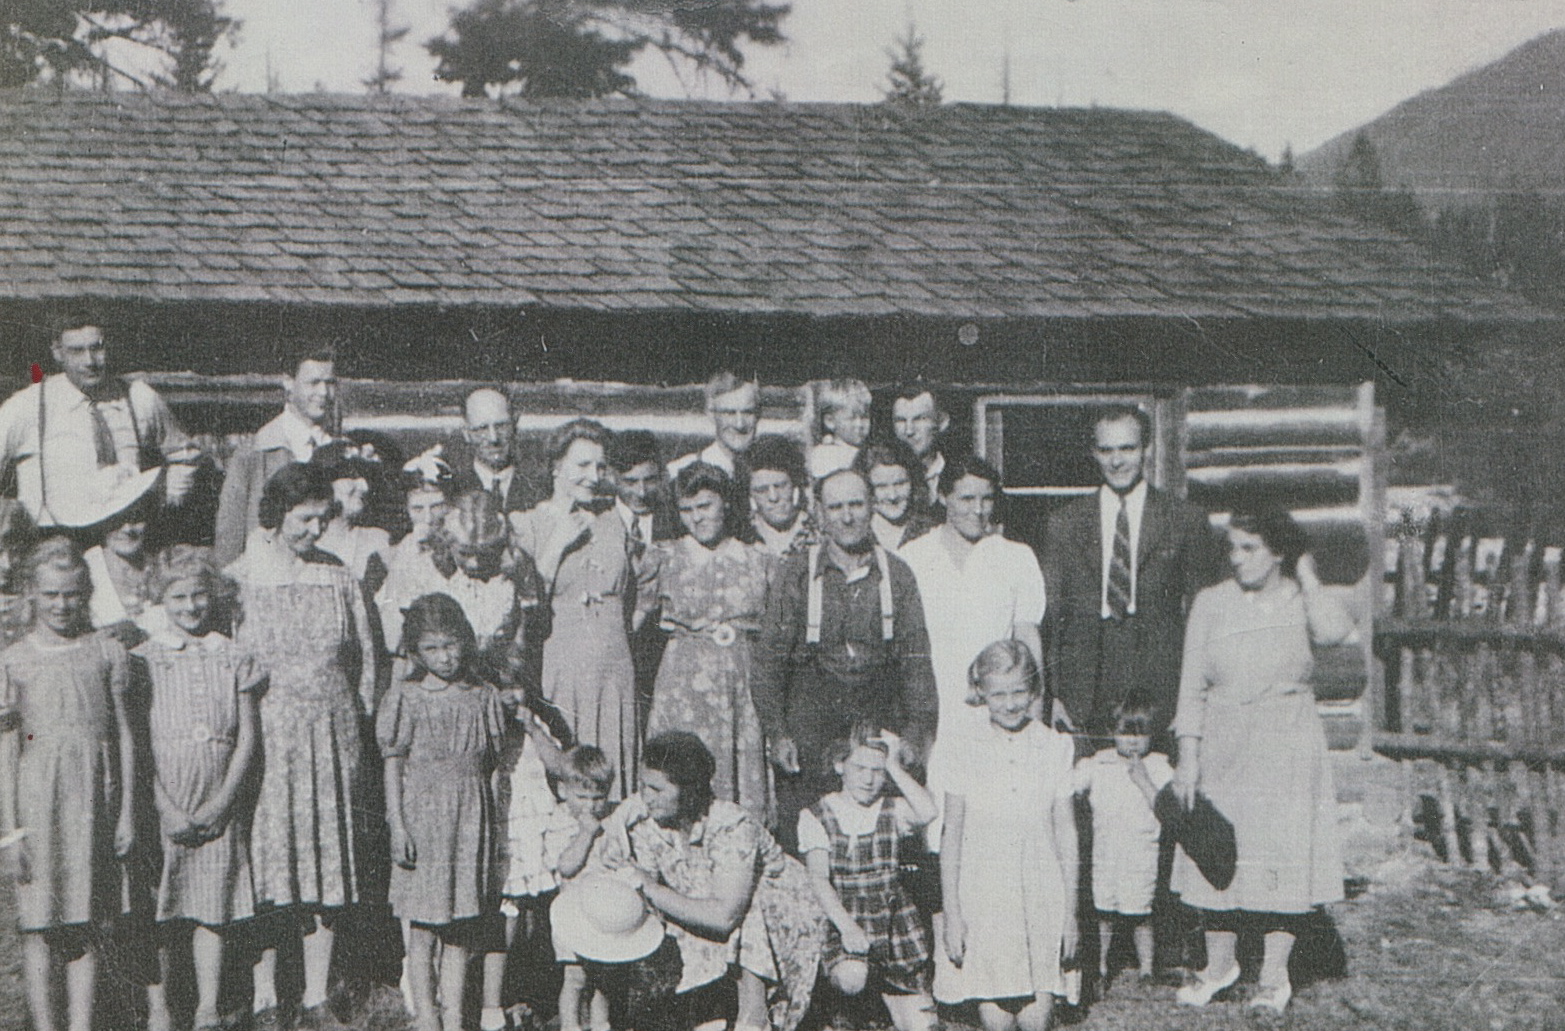 members in front of a log cabin